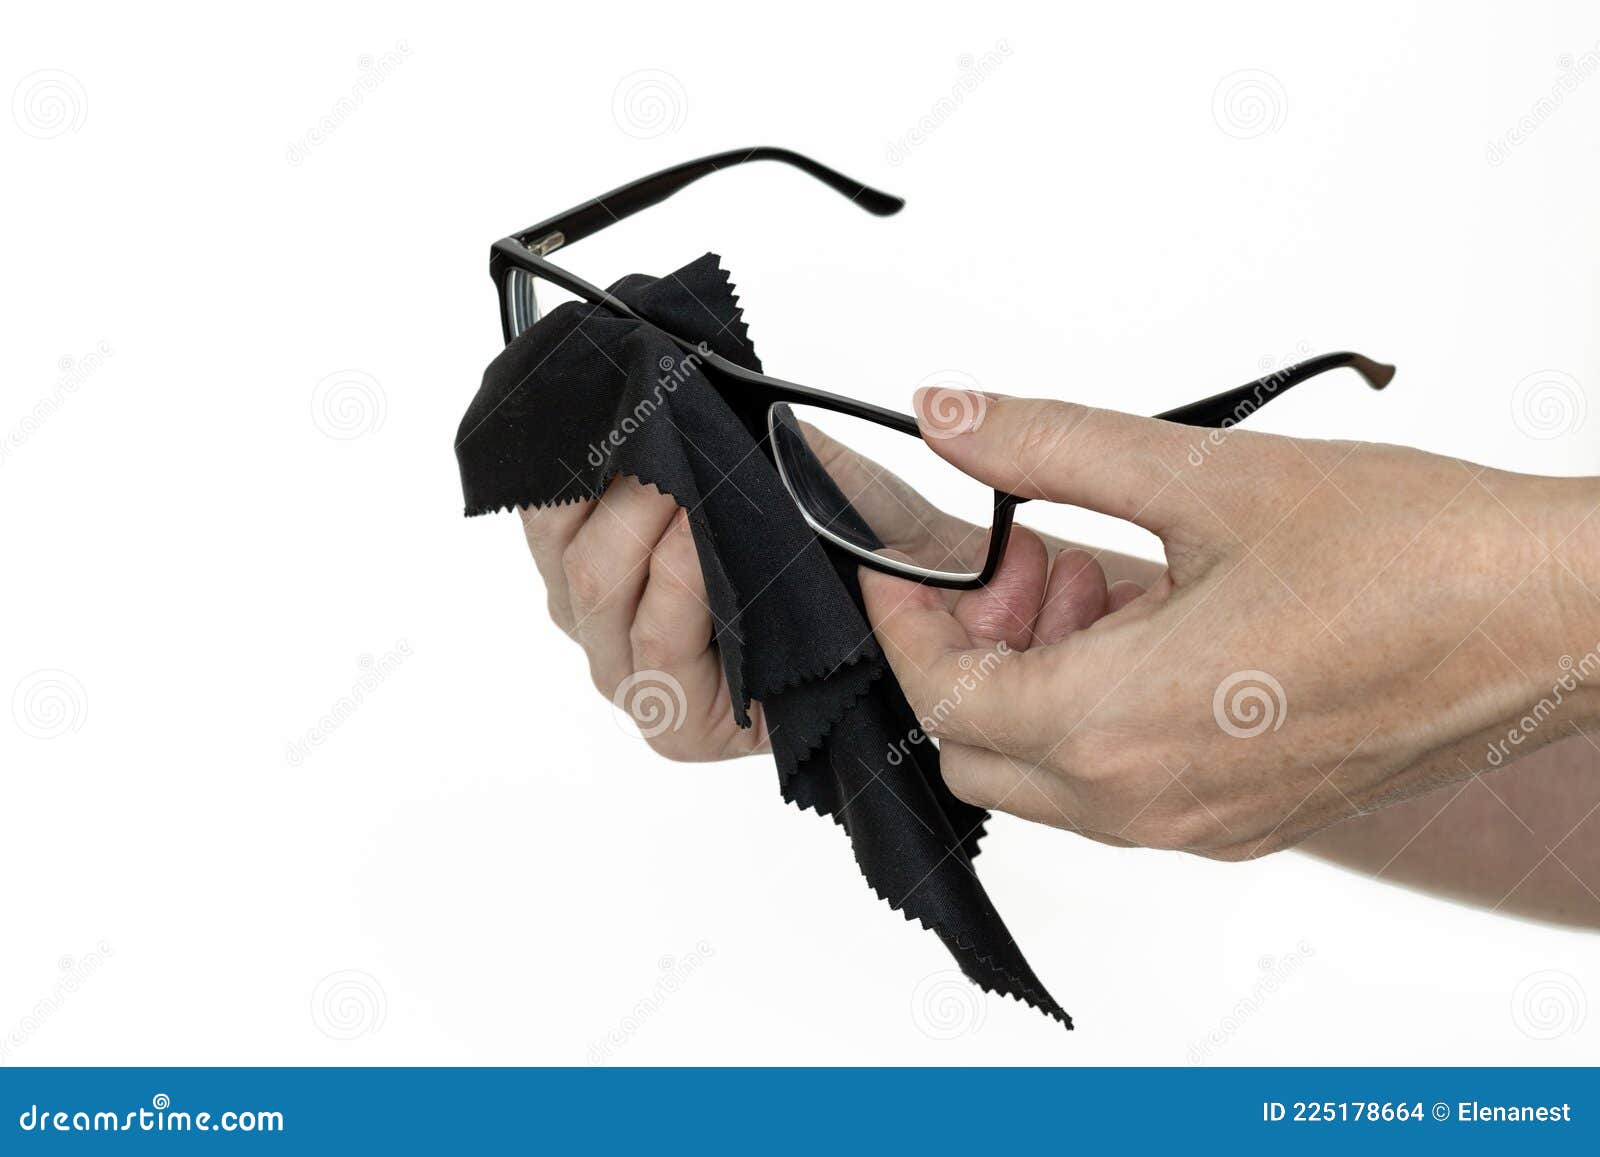 woman`s hands cleaning up glasses in black frame, 